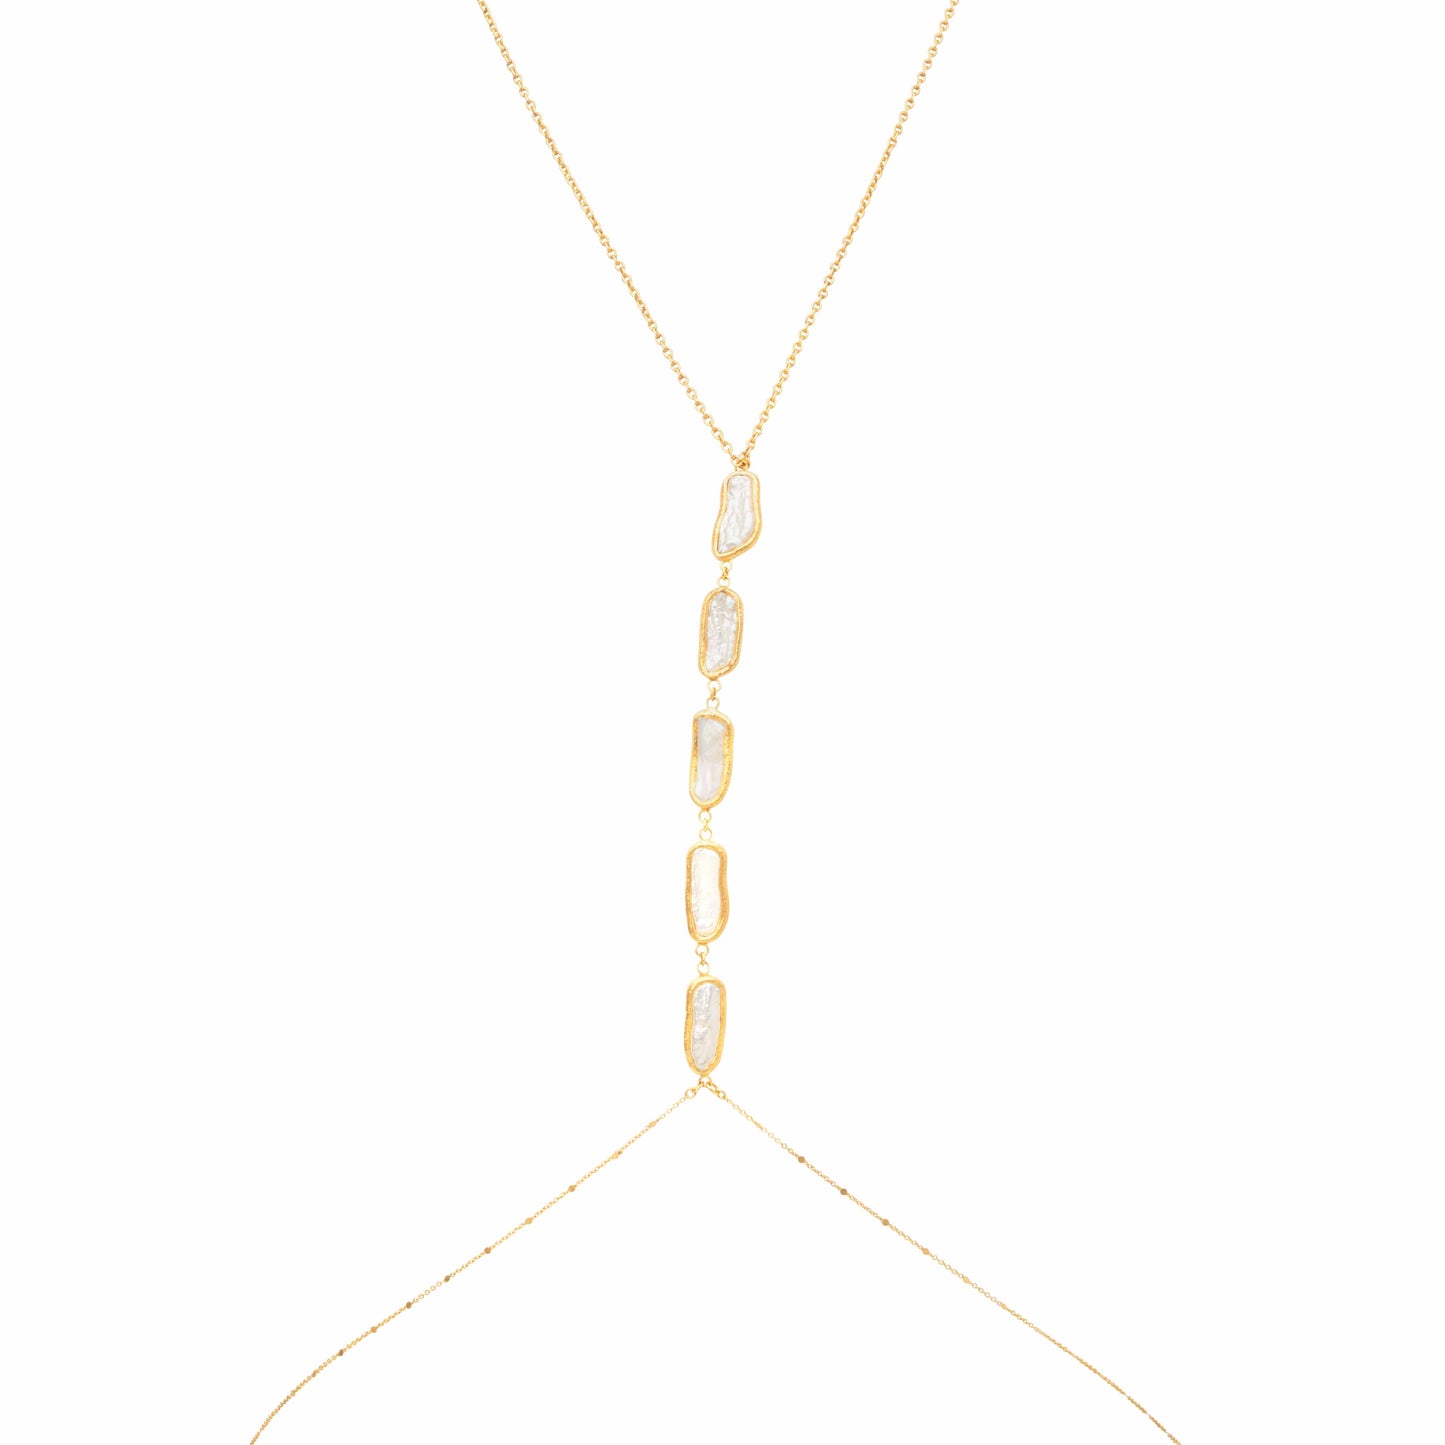 The LIMA Body Chain